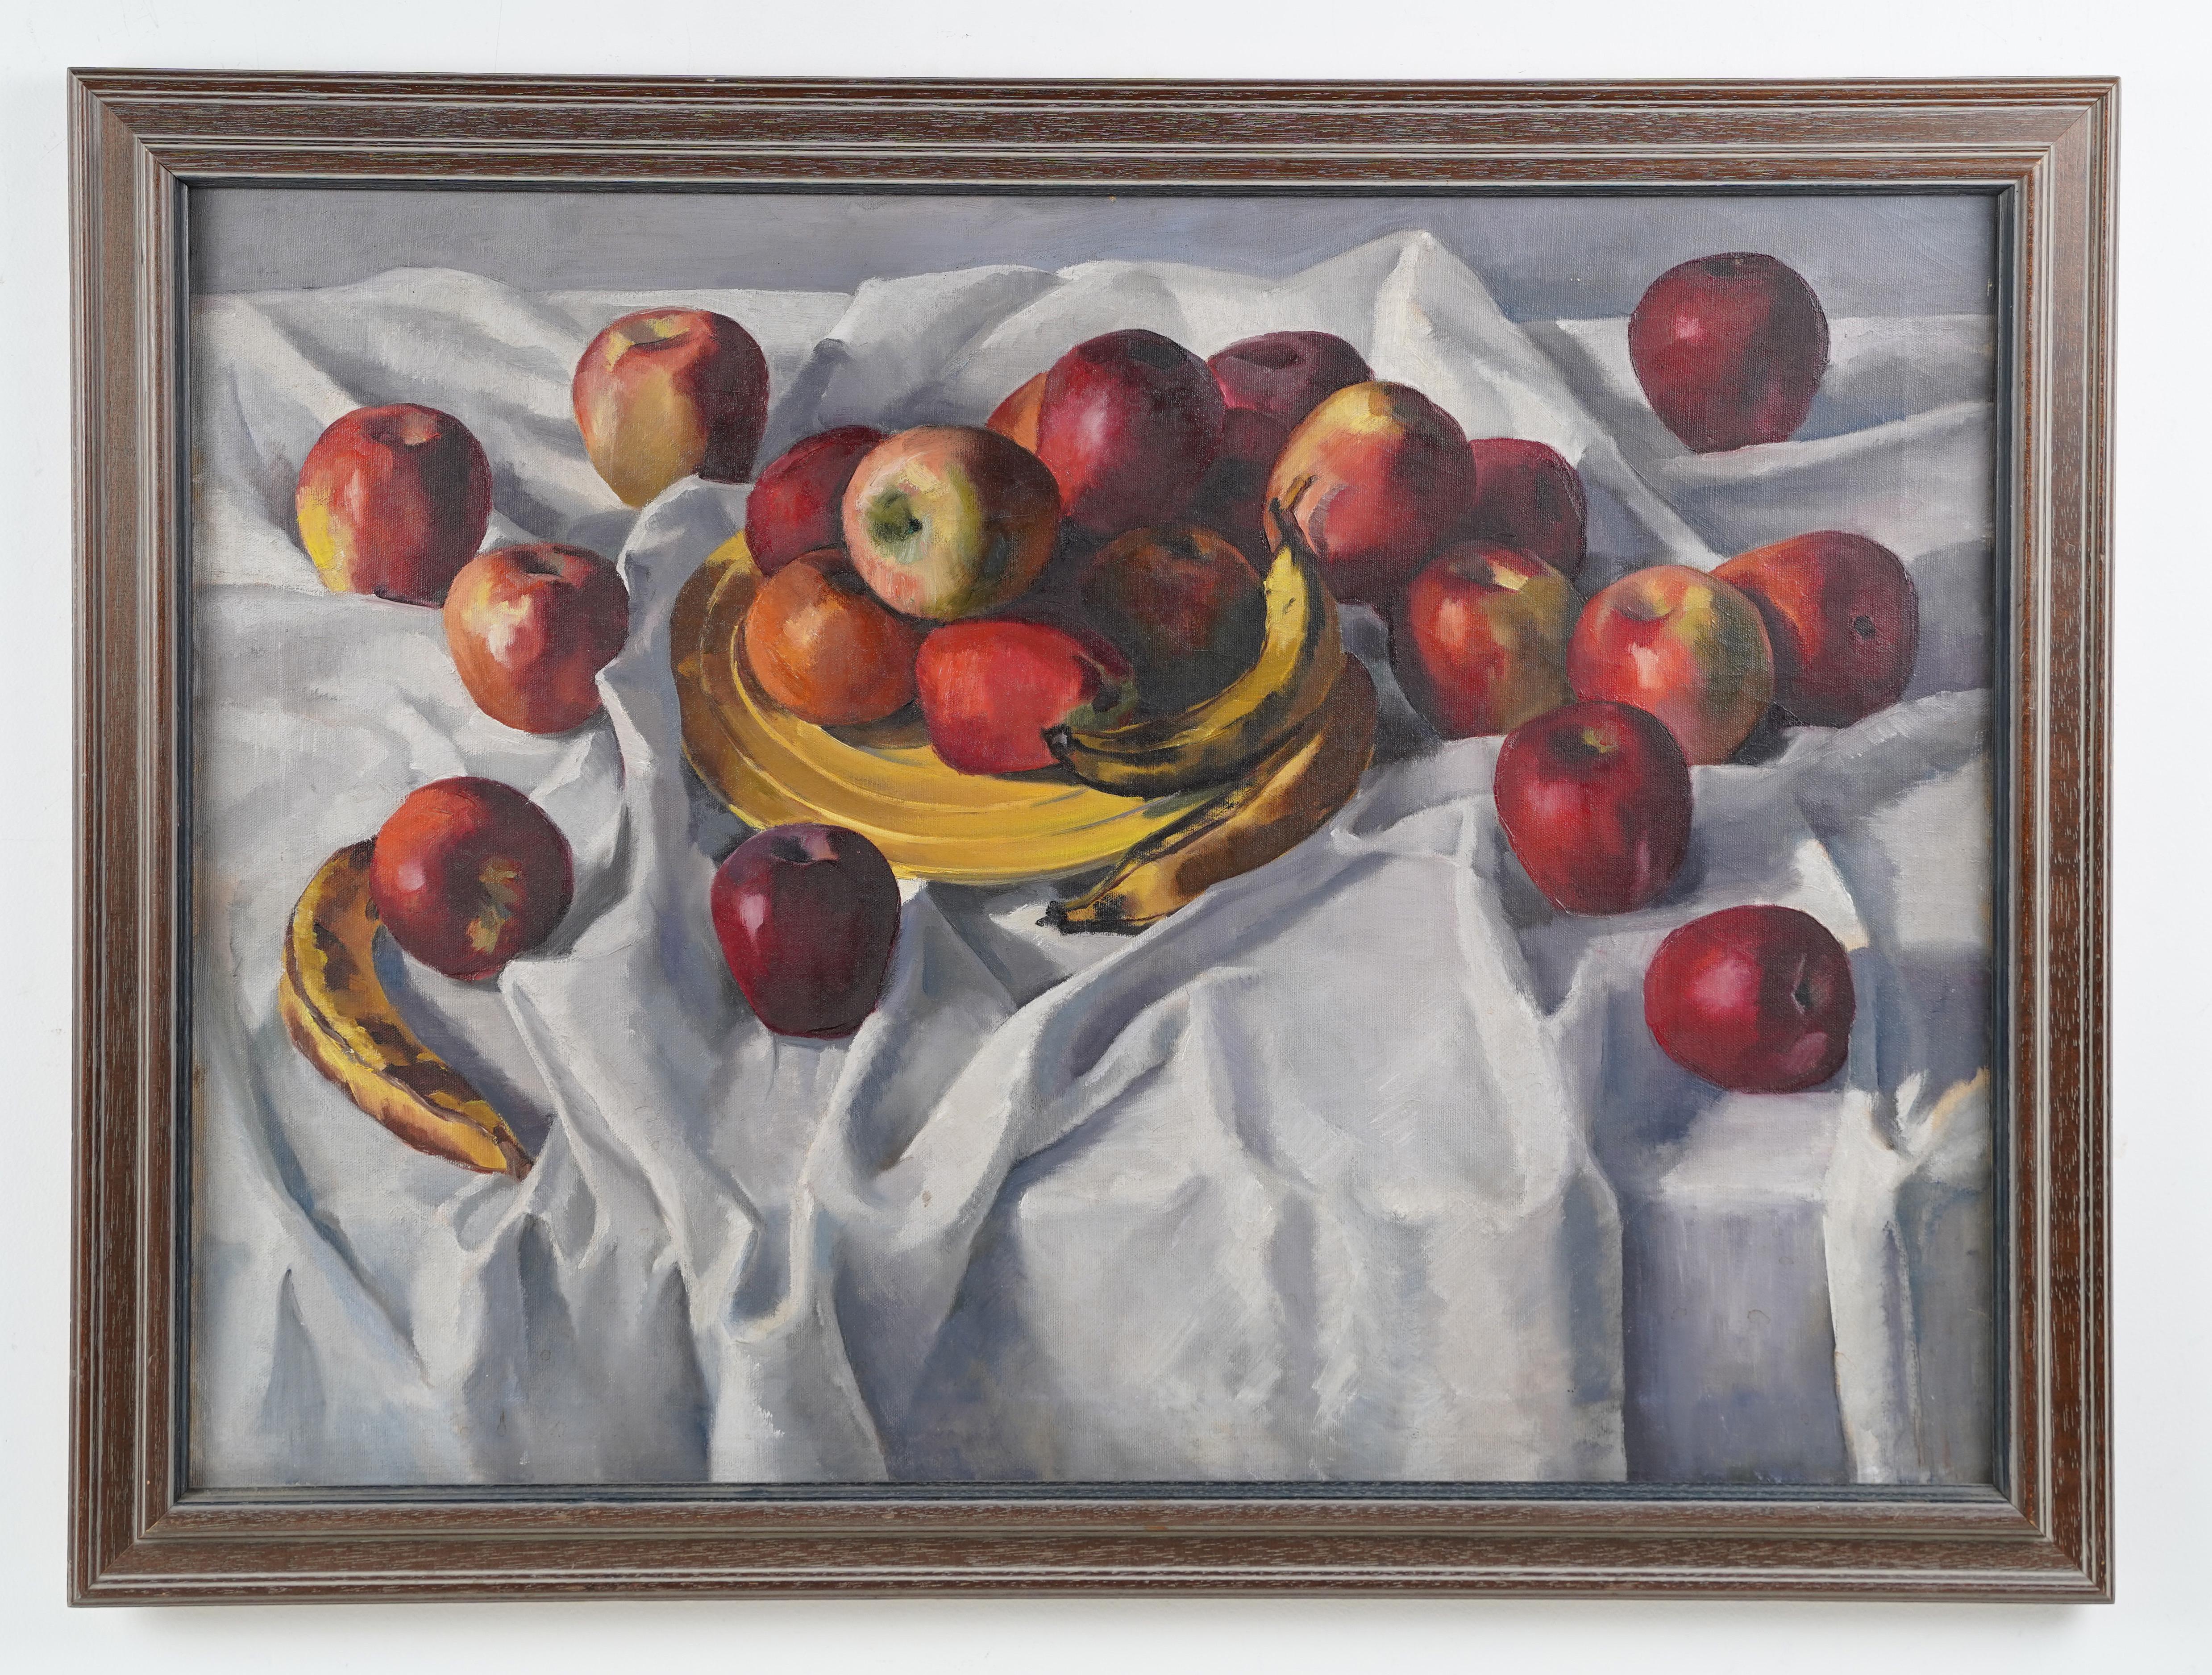 Antique American Modernist Fruit Still Life Kitchen Table Apple Oil Painting - Gray Still-Life Painting by Unknown